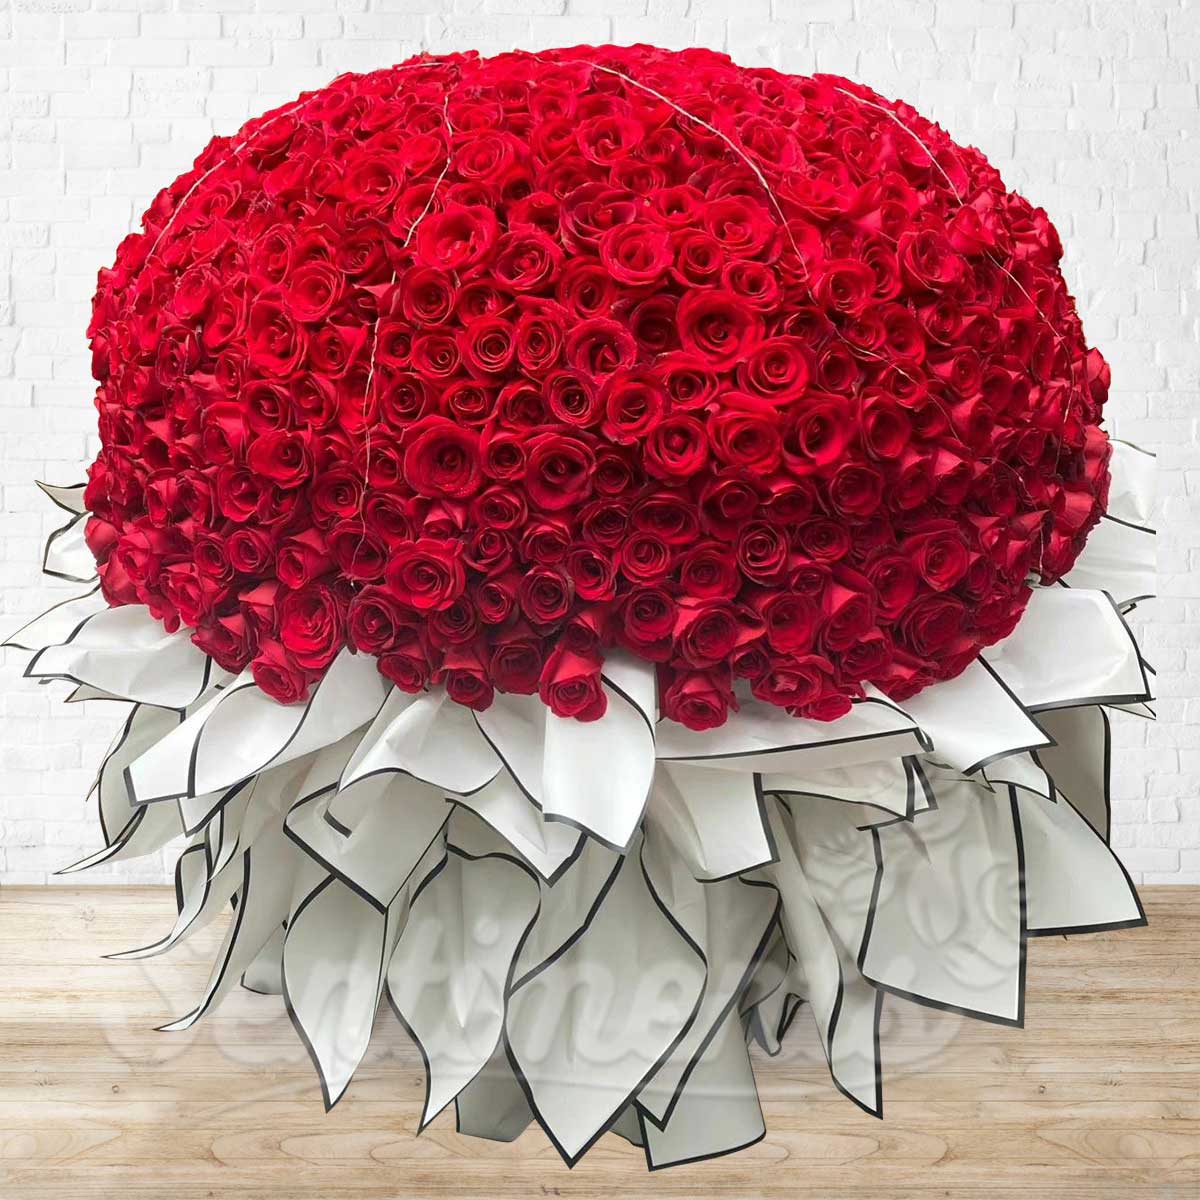 500 Red as Lips Roses Big Hand Bouquet